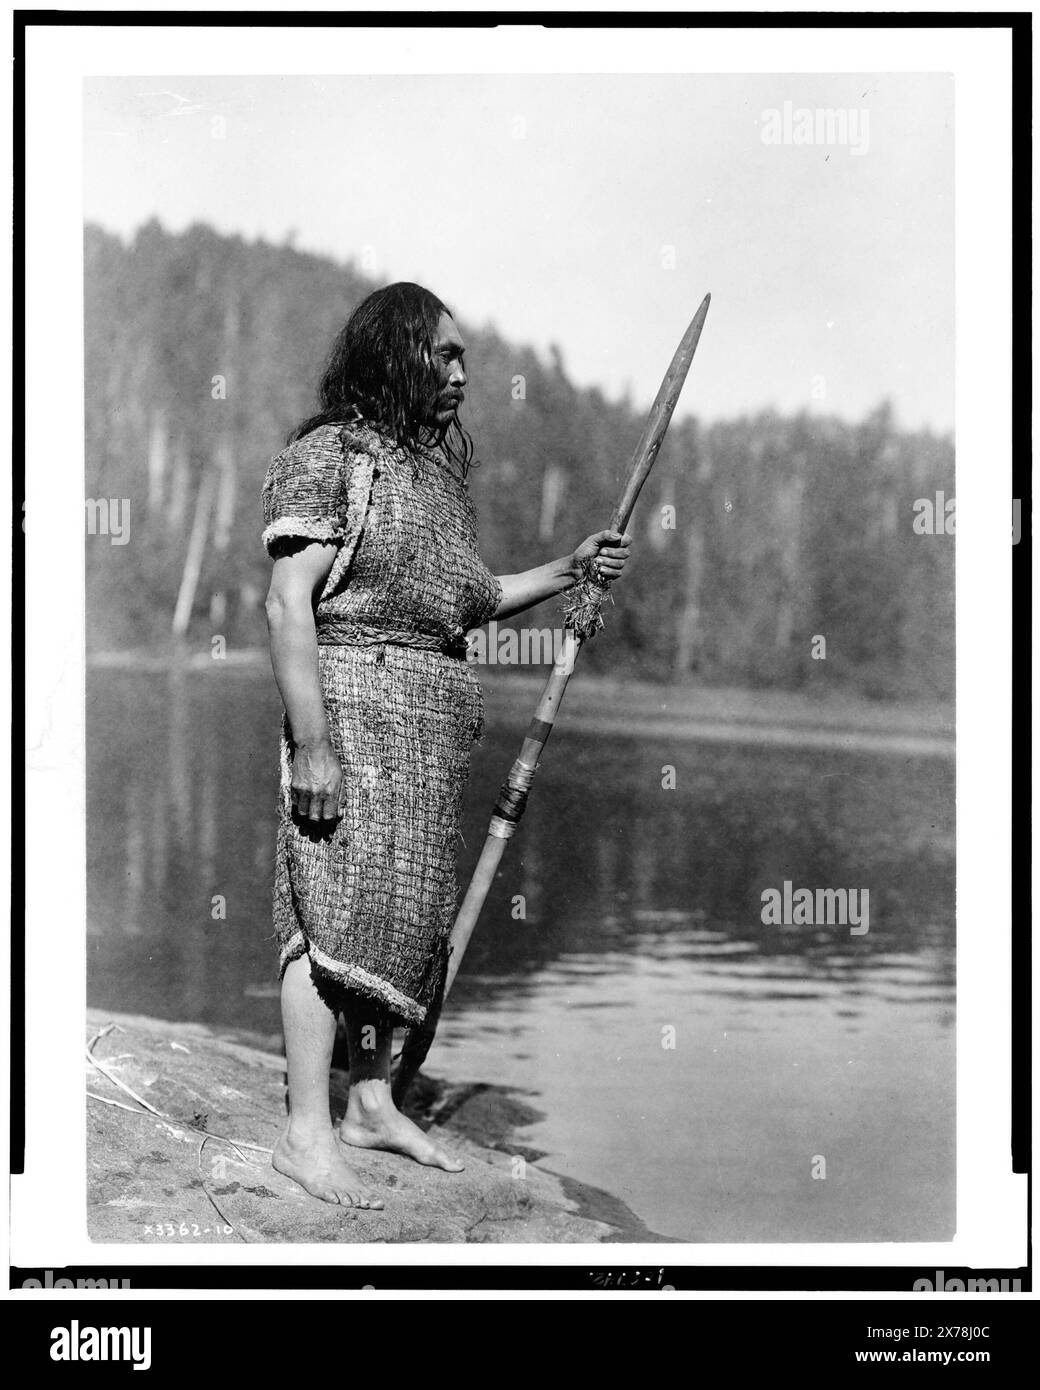 The whaler Clayoquot, Edward S. Curtis Collection ., Curtis no. 3362-10., Published in: The North American Indian / Edward S. Curtis. [Seattle, Wash.] : Edward S. Curtis, 1907-30 suppl., v. 11, pl. 394.. Indians of North America, Washington (State), Clothing & dress, 1910. , Nootka Indians, Clothing & dress, 1910. Stock Photo